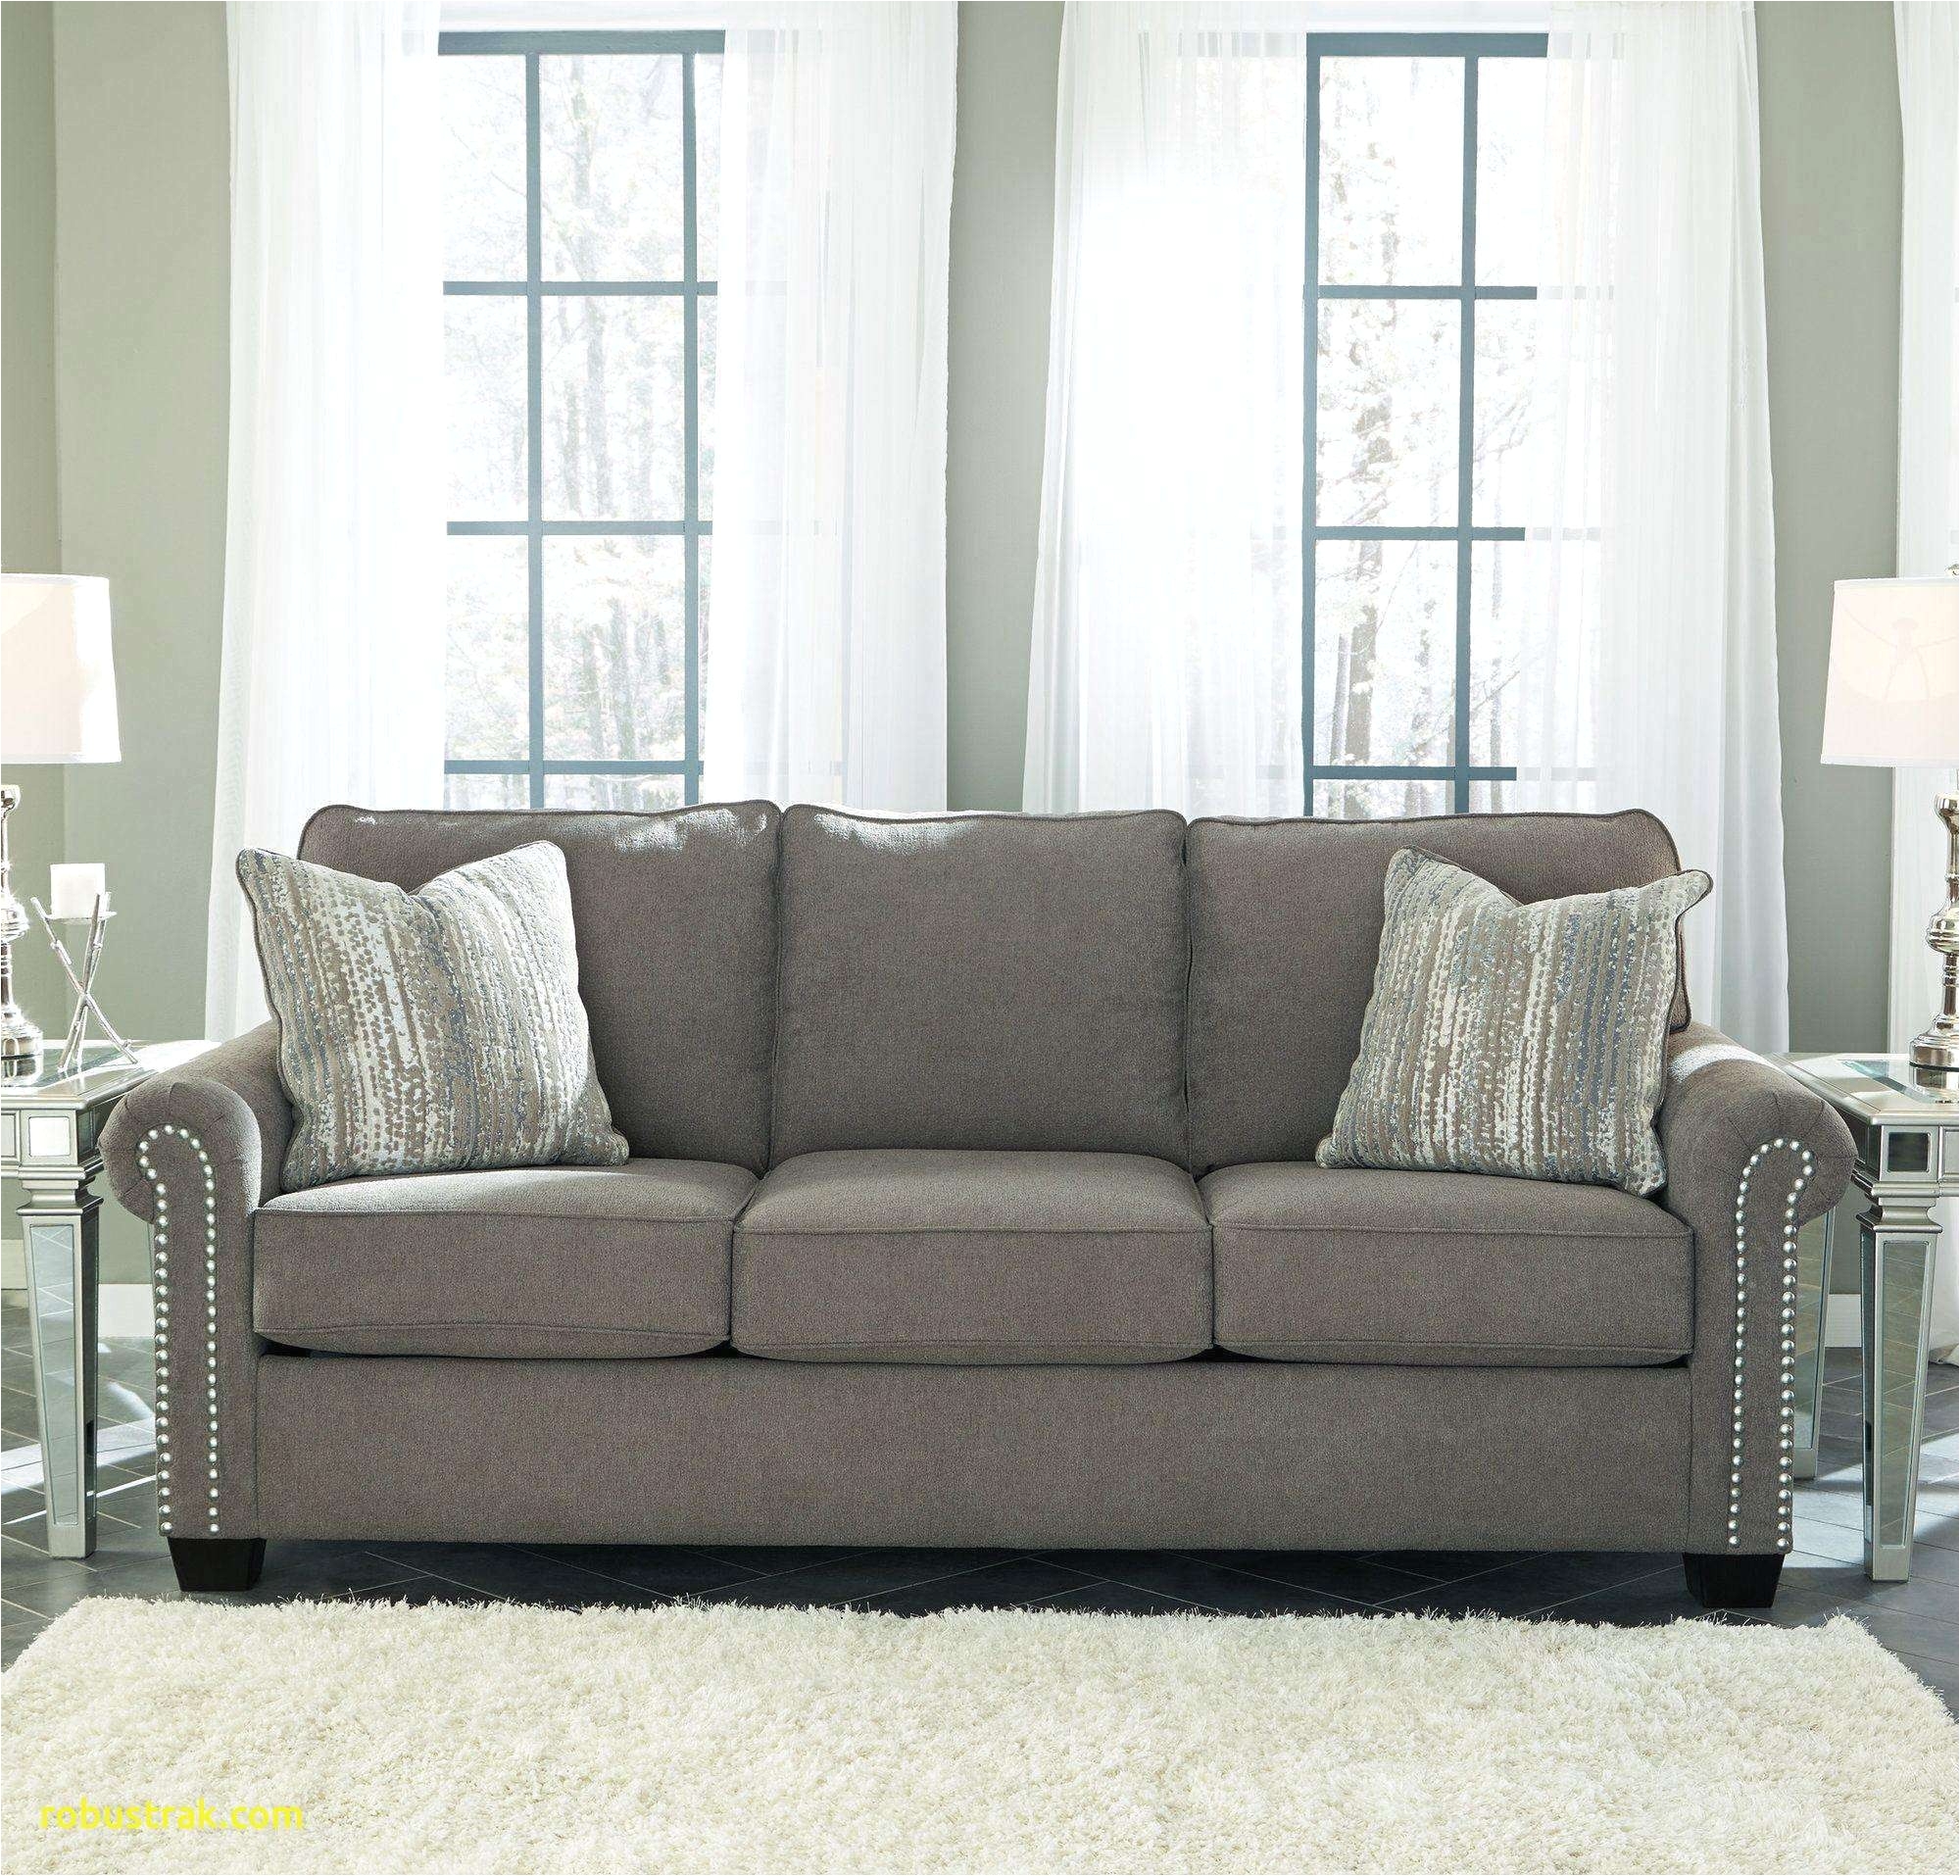 Contemporary Sectional sofas 10inspirational Sectional sofas with Ottoman